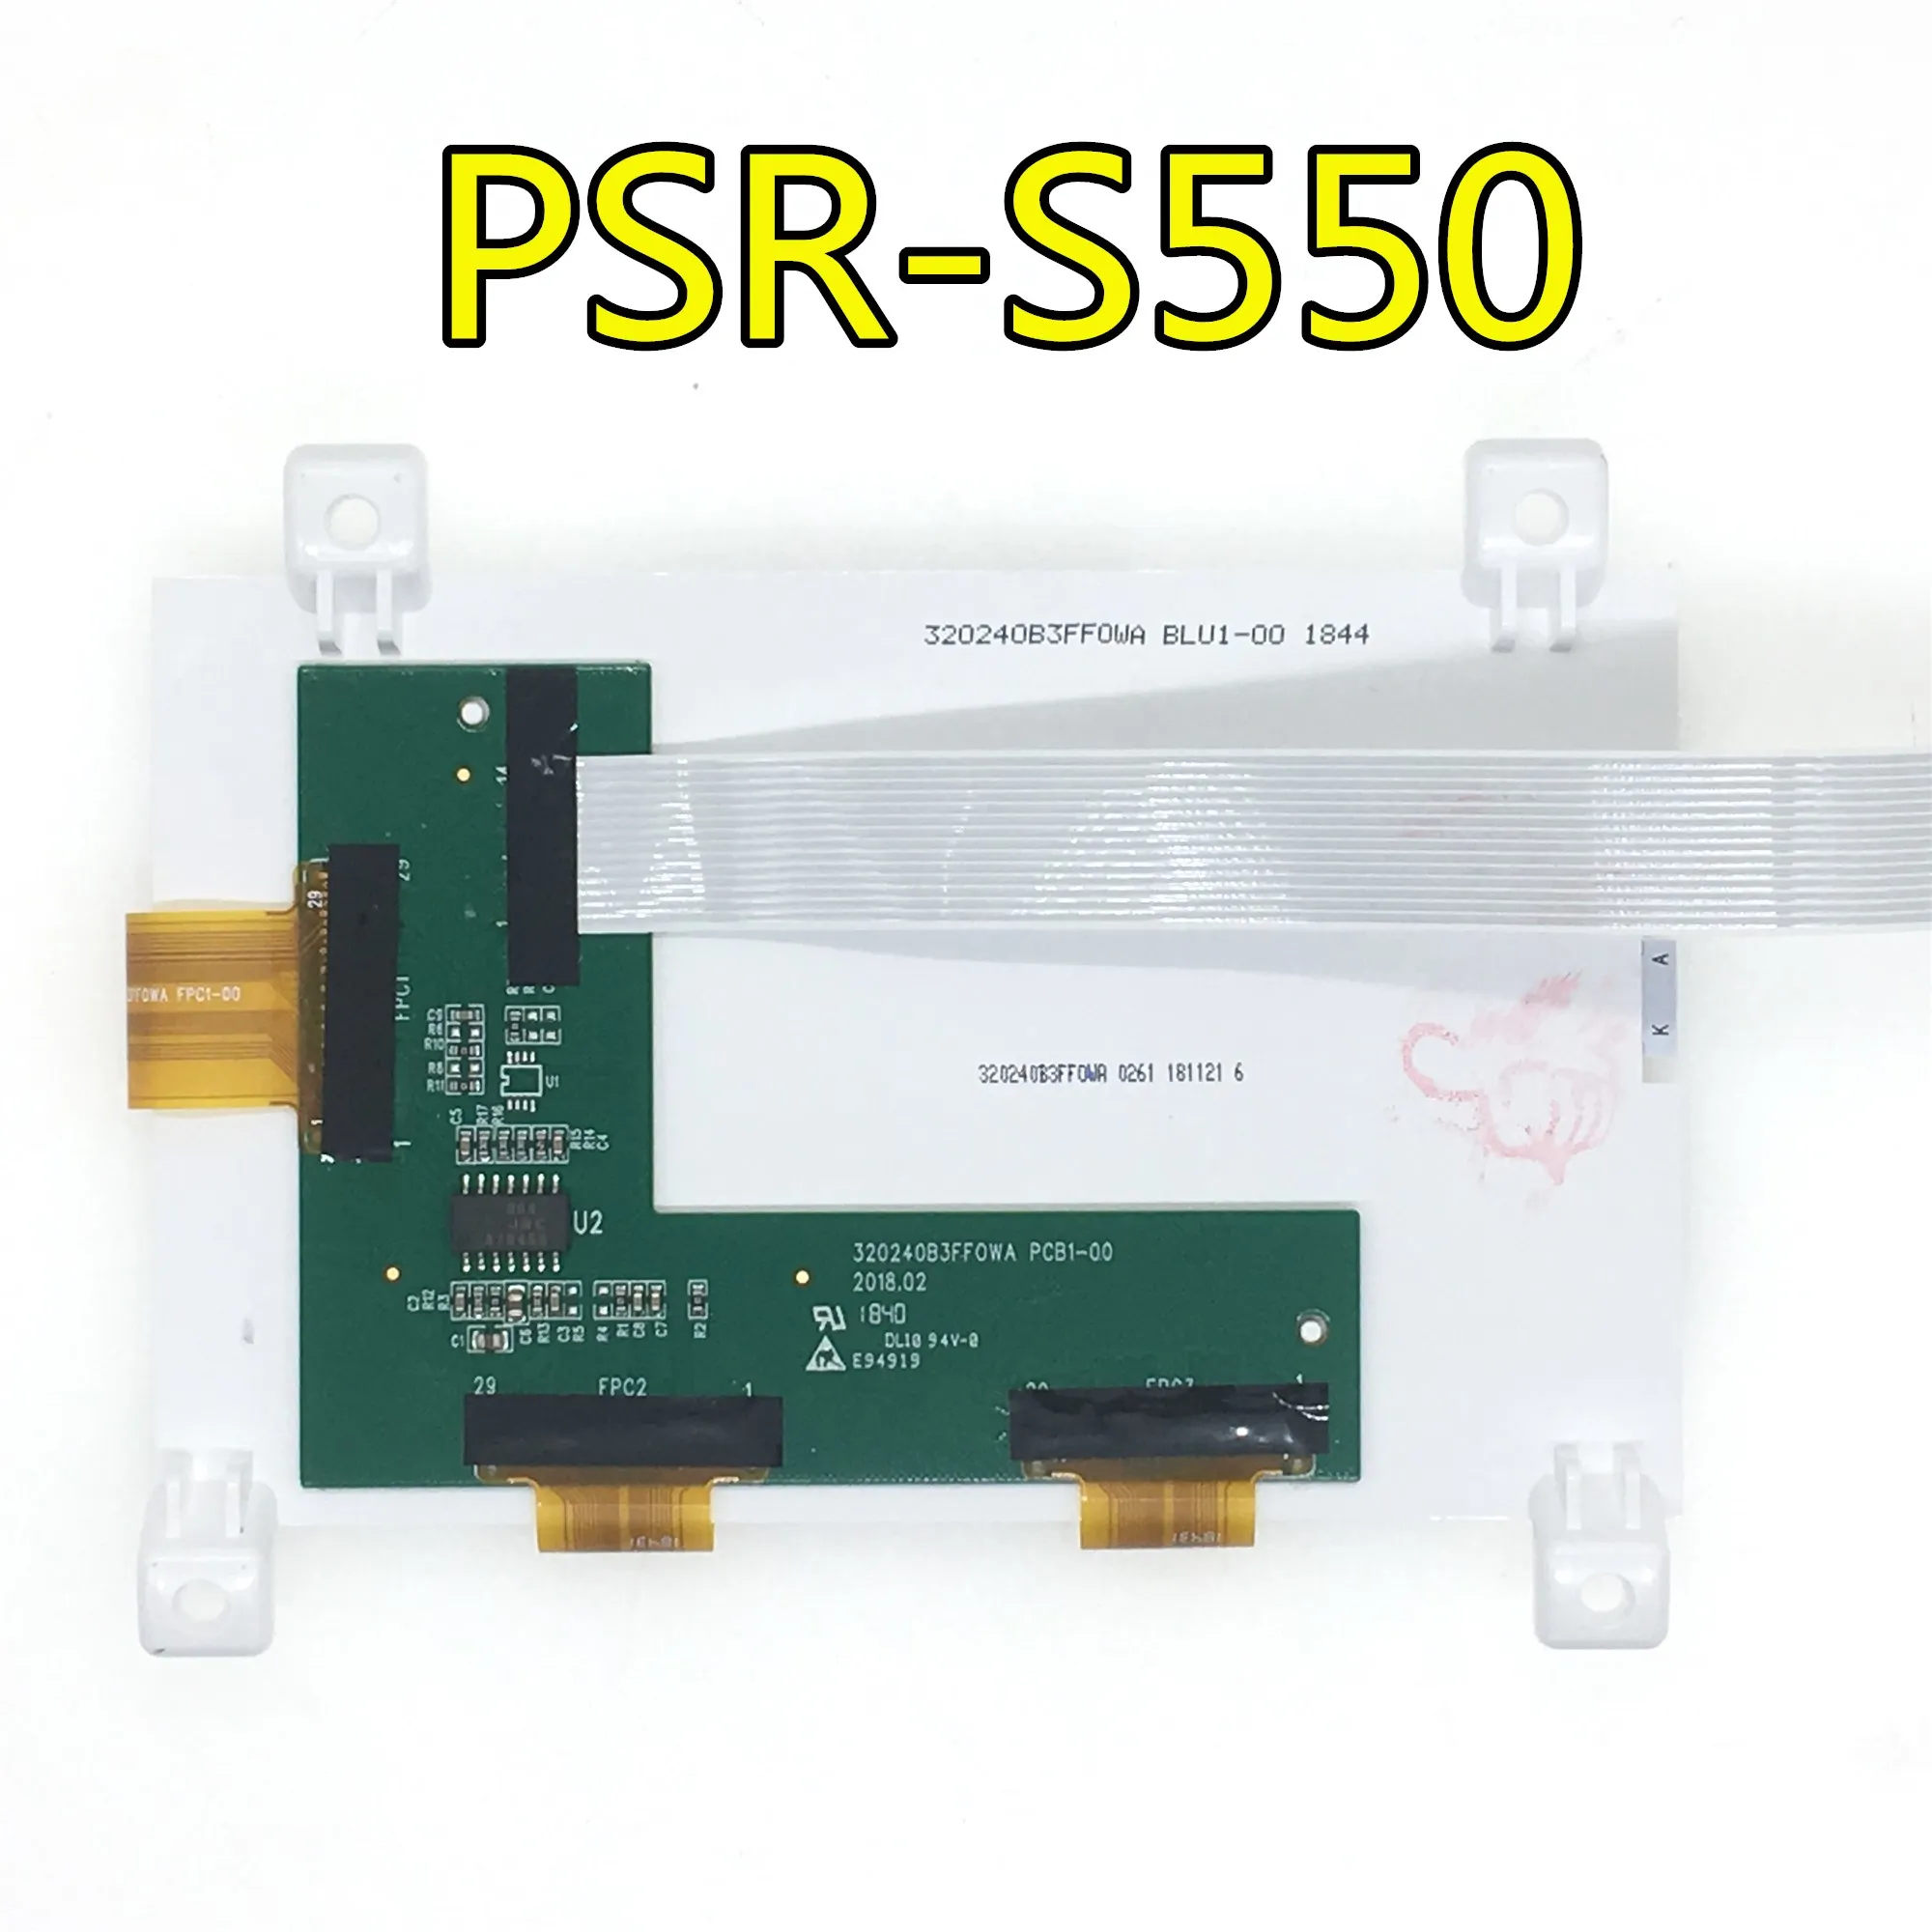 Can provide test video , 90 days warranty NEW Replacement LCD Screen  PSR-S550 PSR S550